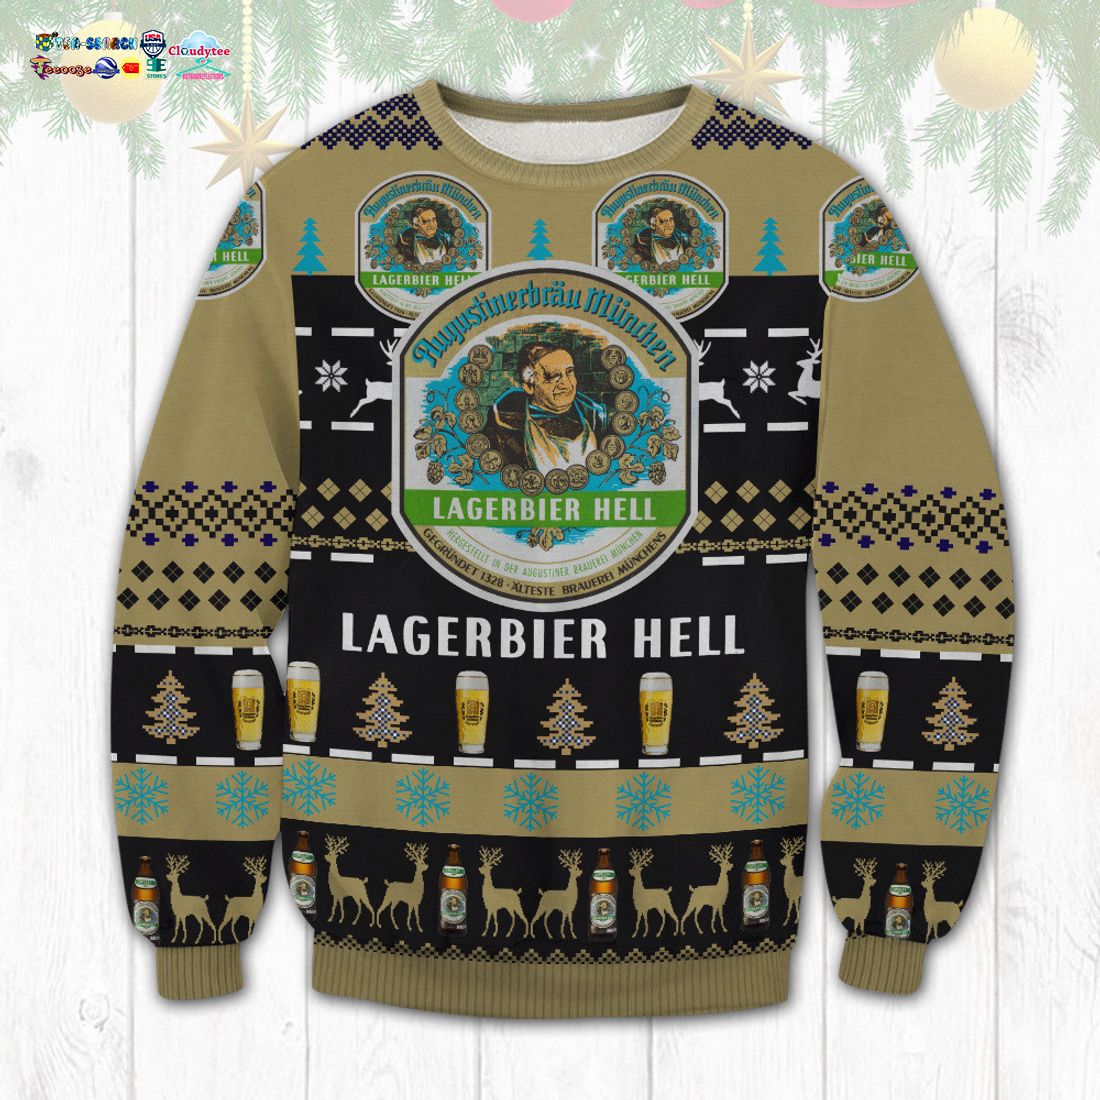 Lagerbier Hell Ugly Christmas Sweater - Have you joined a gymnasium?